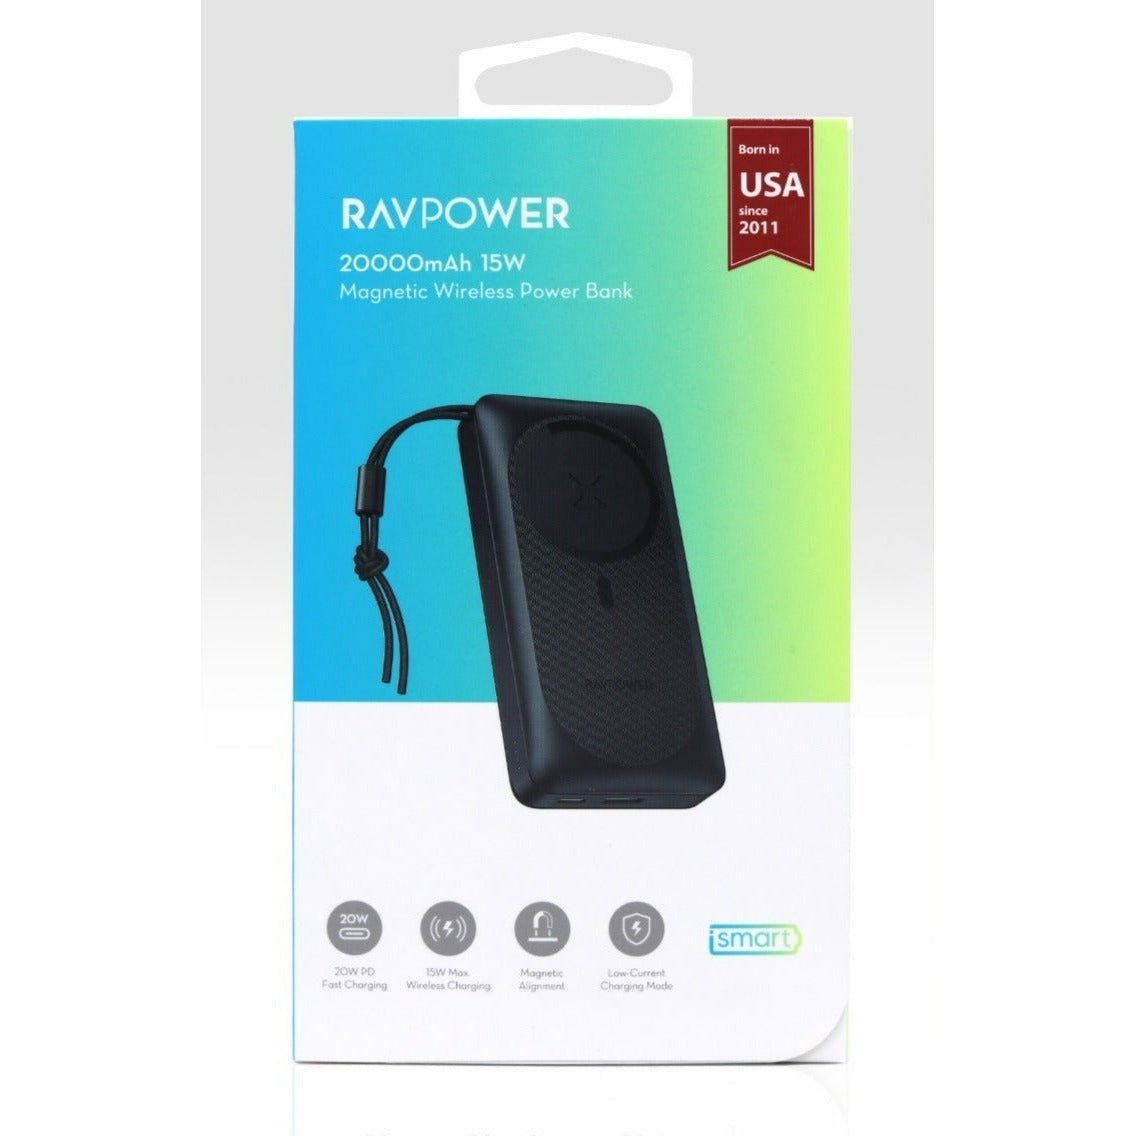 RAVPower 20000 mAh Battery with Type-C port and USB port with magnet for wireless charging - Black